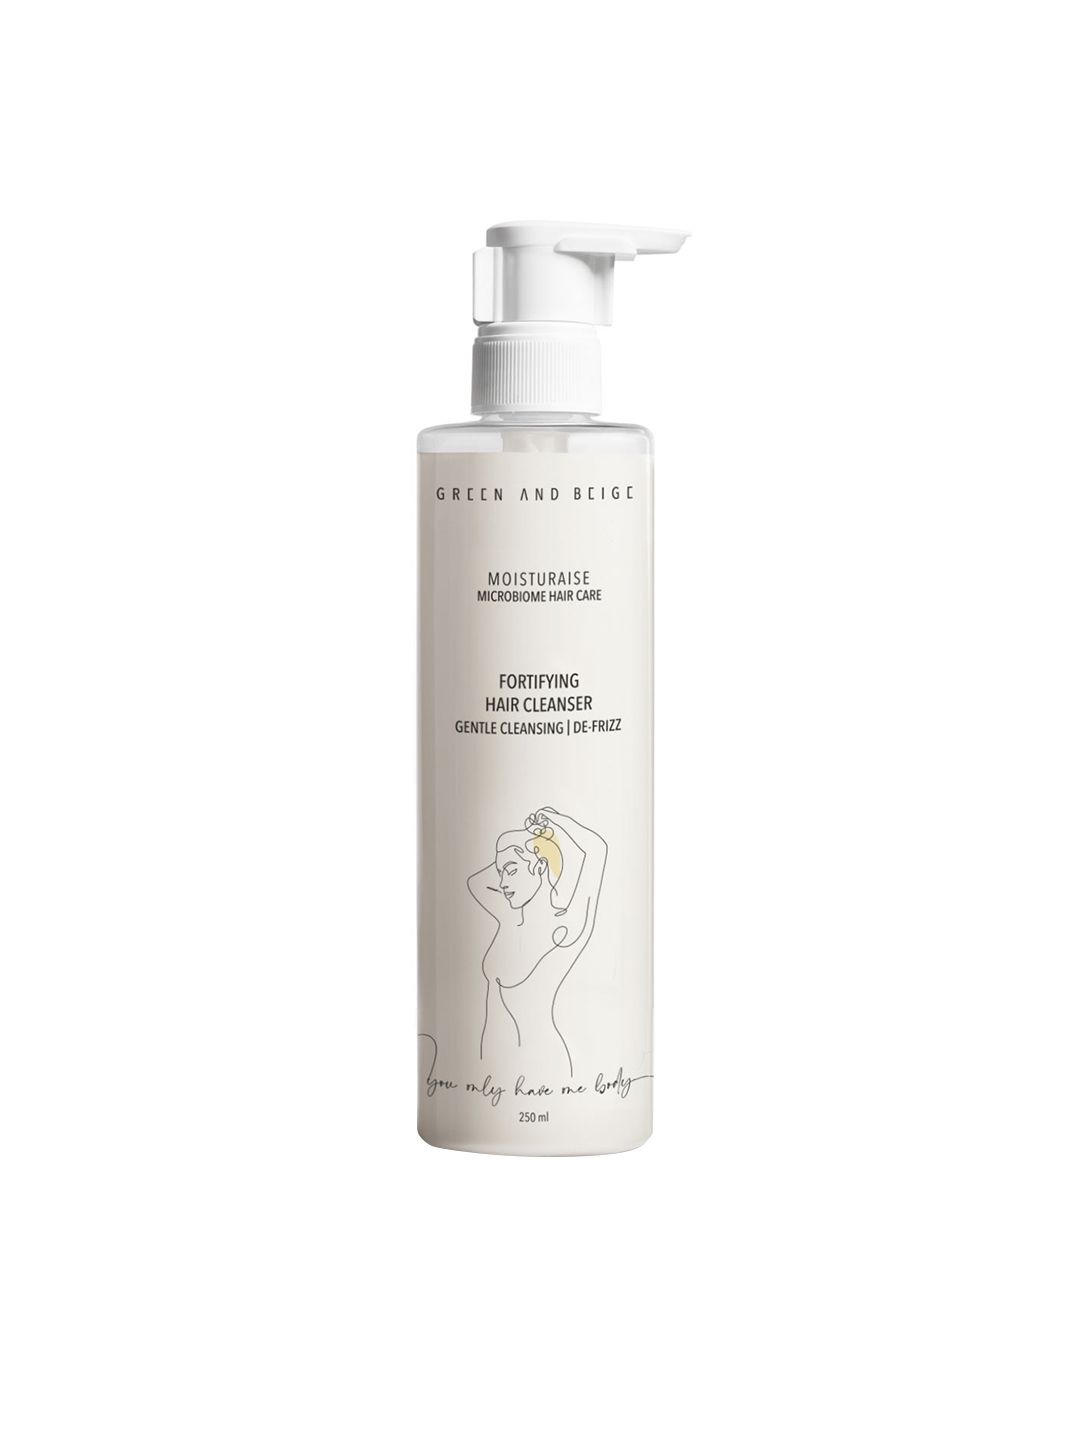 GREEN AND BEIGE Moisturaise Microbiome Hair Care Fortifying Hair Cleanser - 250 ml Price in India